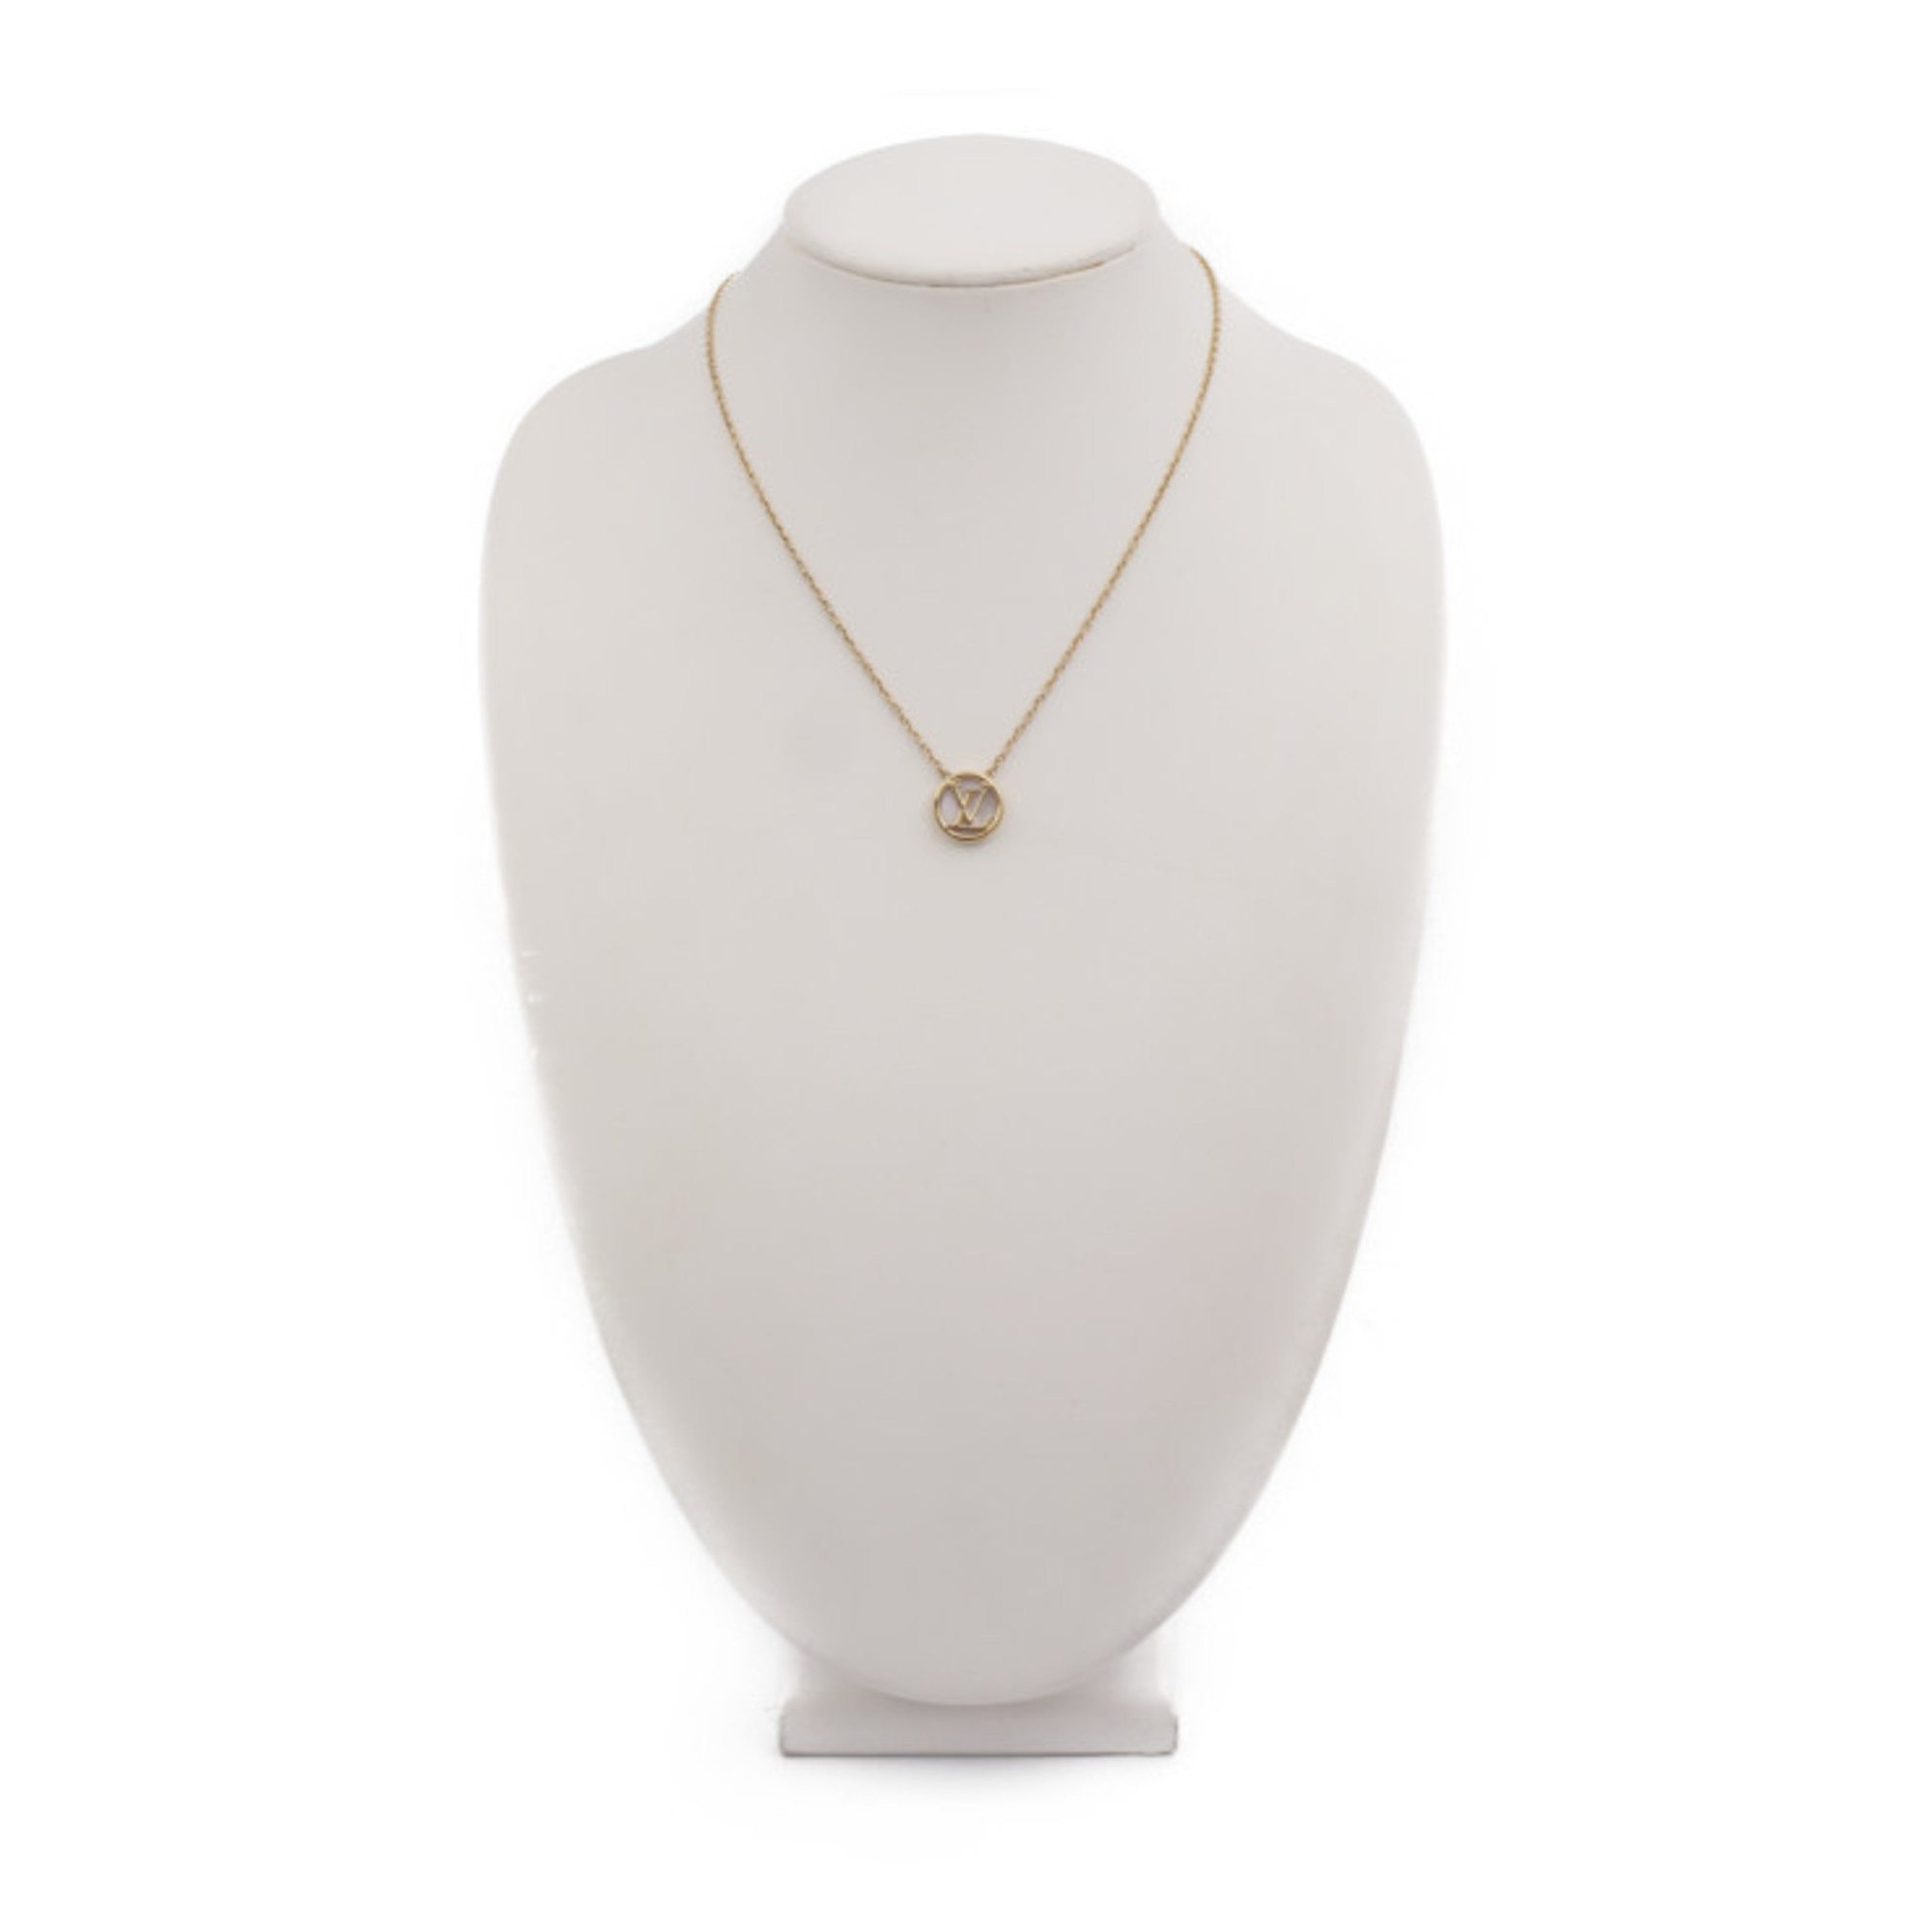 LOUIS VUITTON Louis Vuitton Collier L TO V Necklace M80259 Metal Mother of Pearl Gold Circle